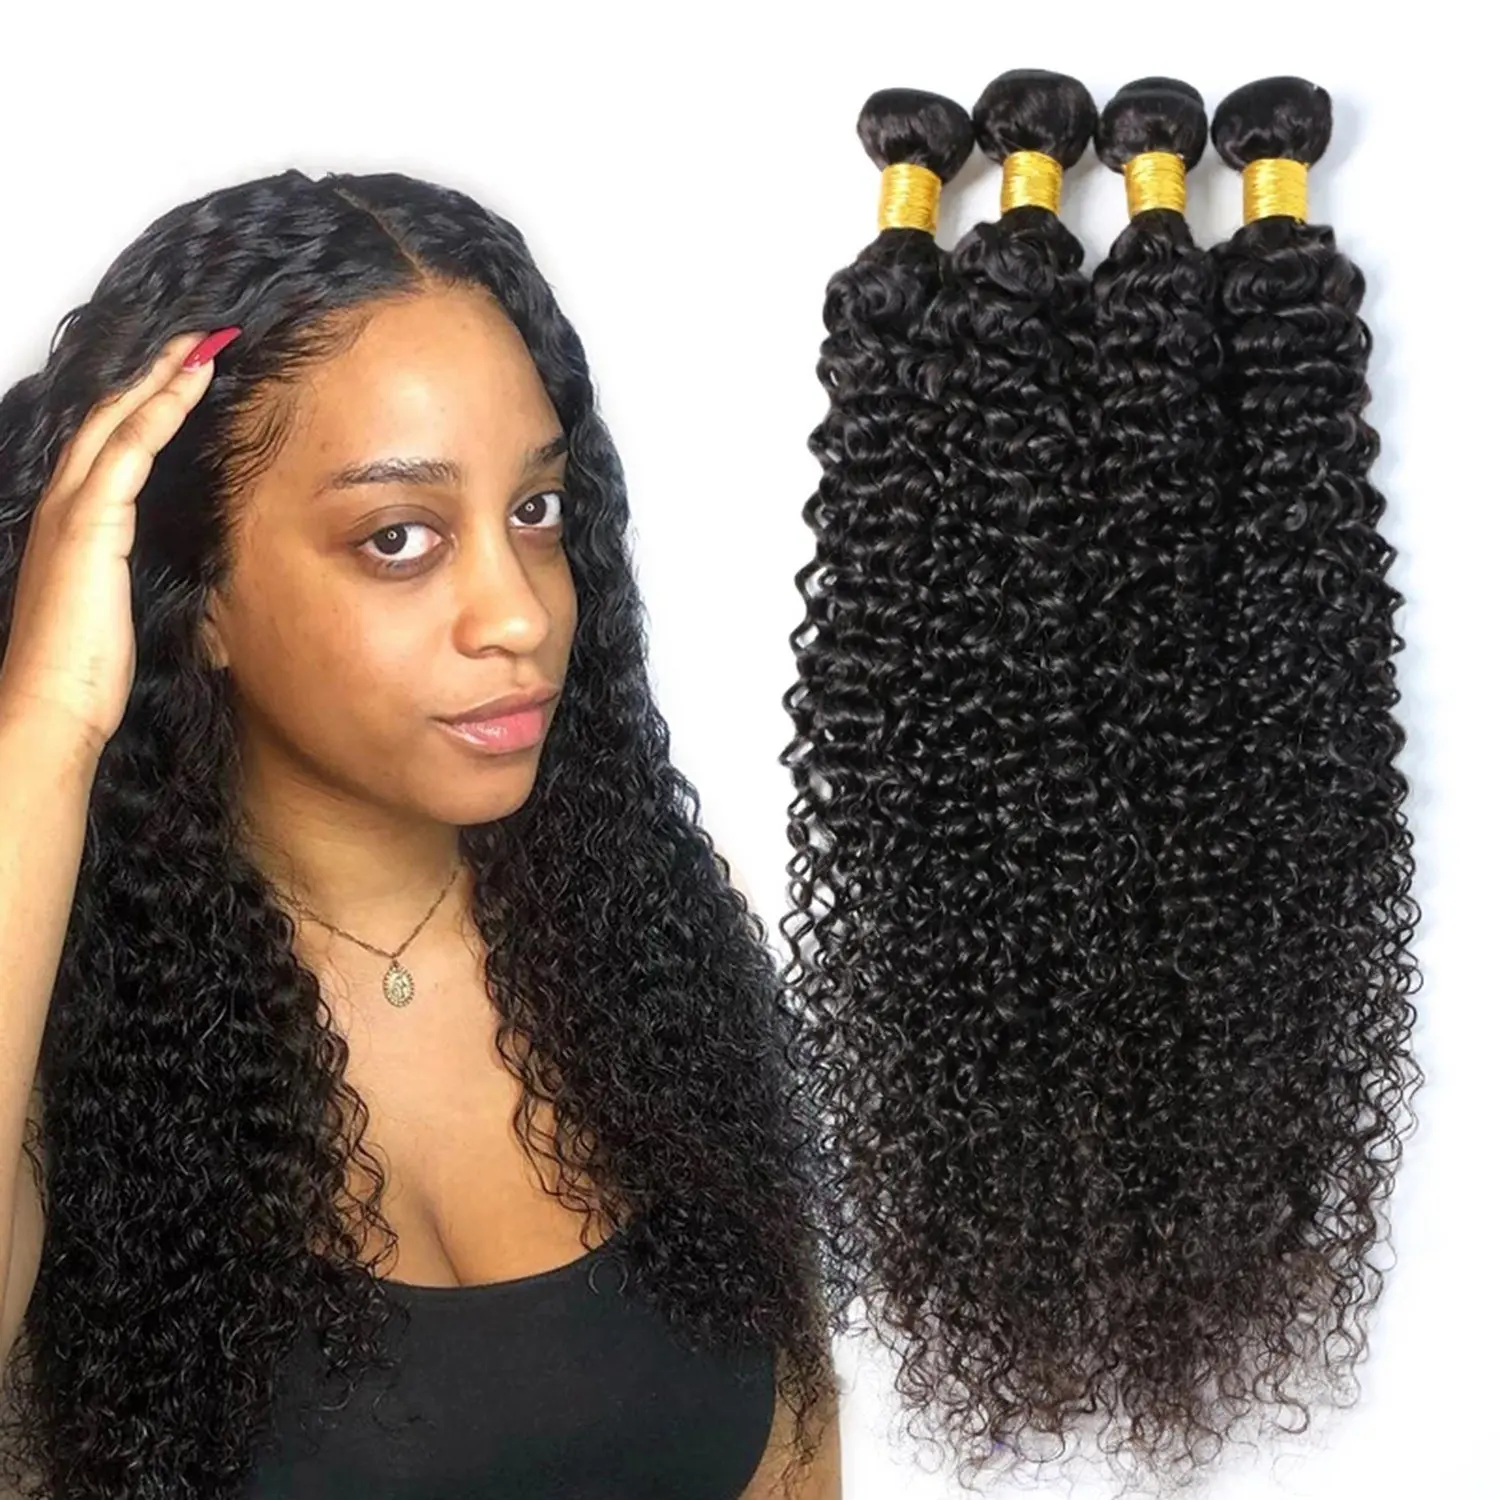 

Mongolian Cambodian Kinky Curly Hair Weave, Raw Cambodian Hair Bundles Vendor ,Indian Natural Raw Burmese Curly Hair Products